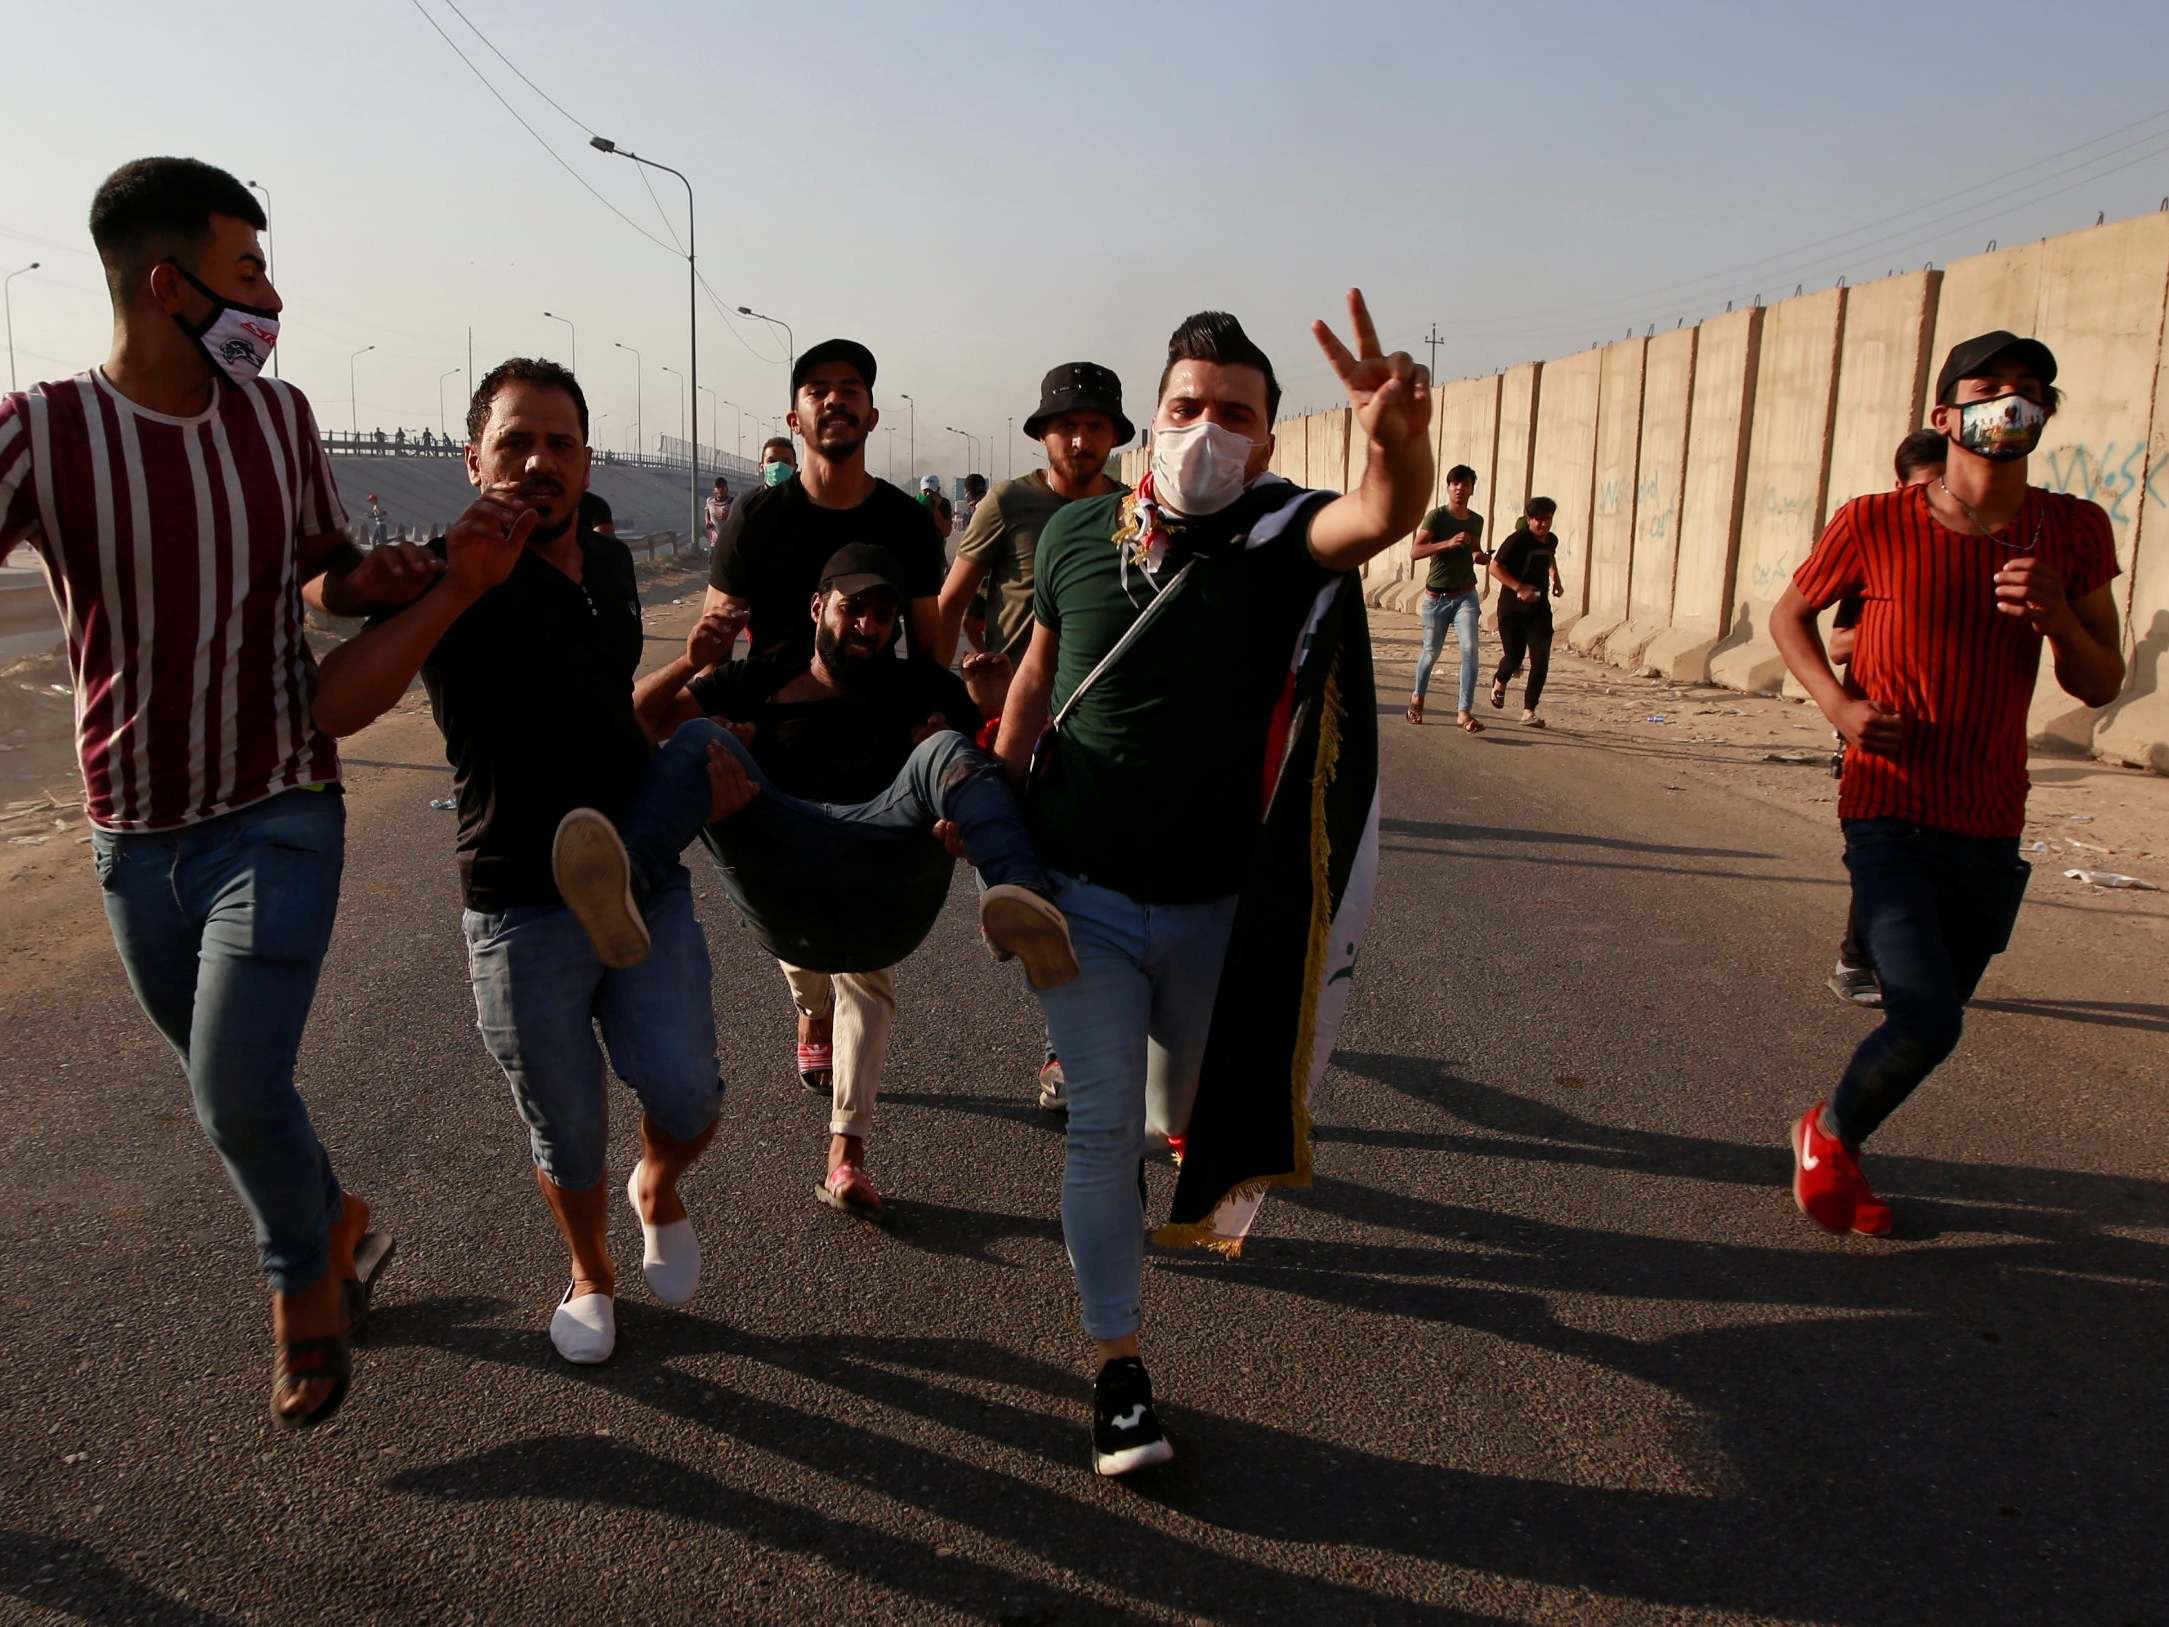 Men carry a demonstrator injured at a protest during a curfew in Baghdad on Thursday